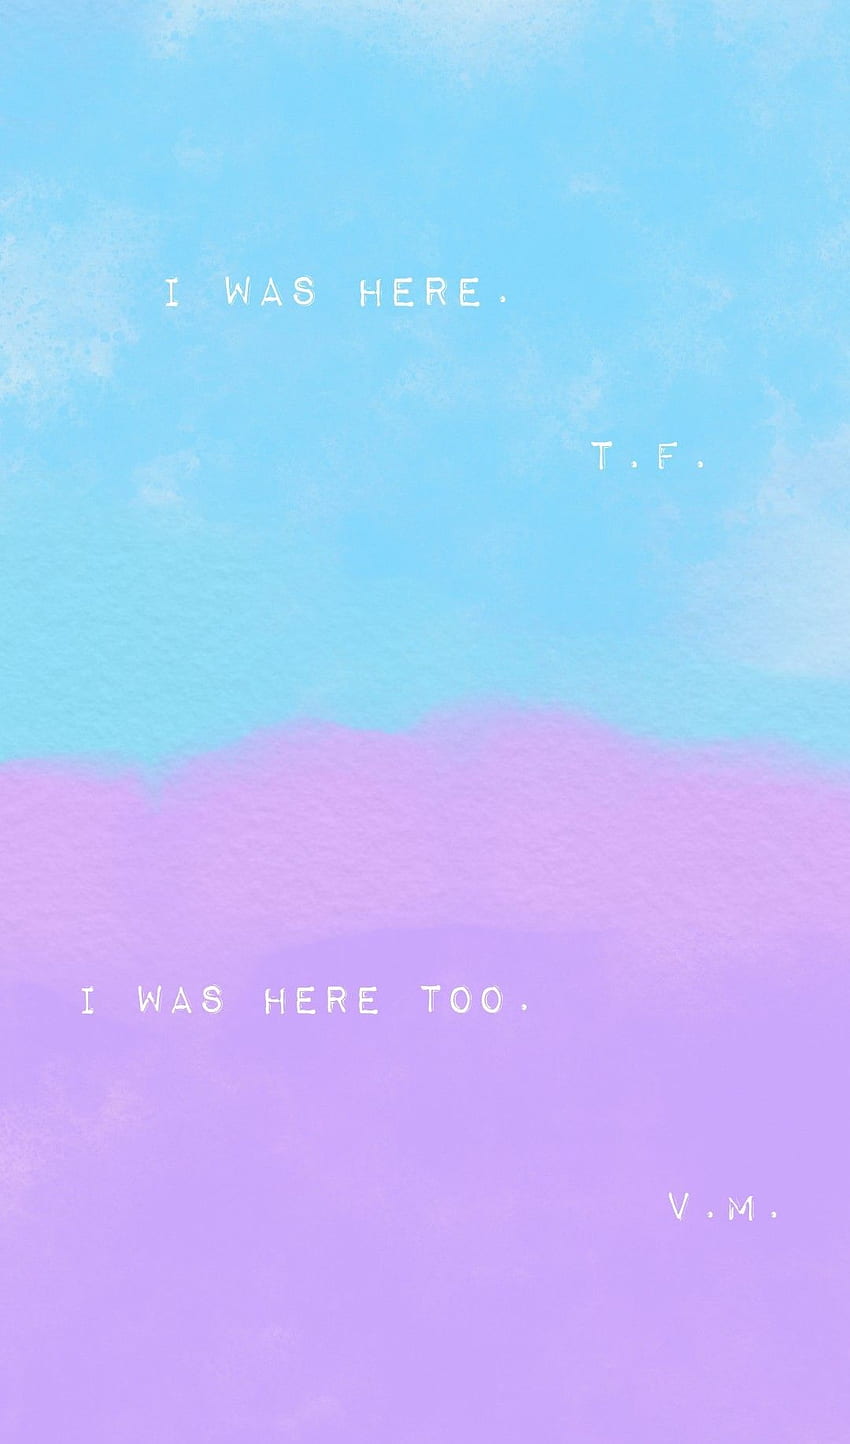 I was here. T.F. I was here too. V.M. All The Bright Places HD phone wallpaper